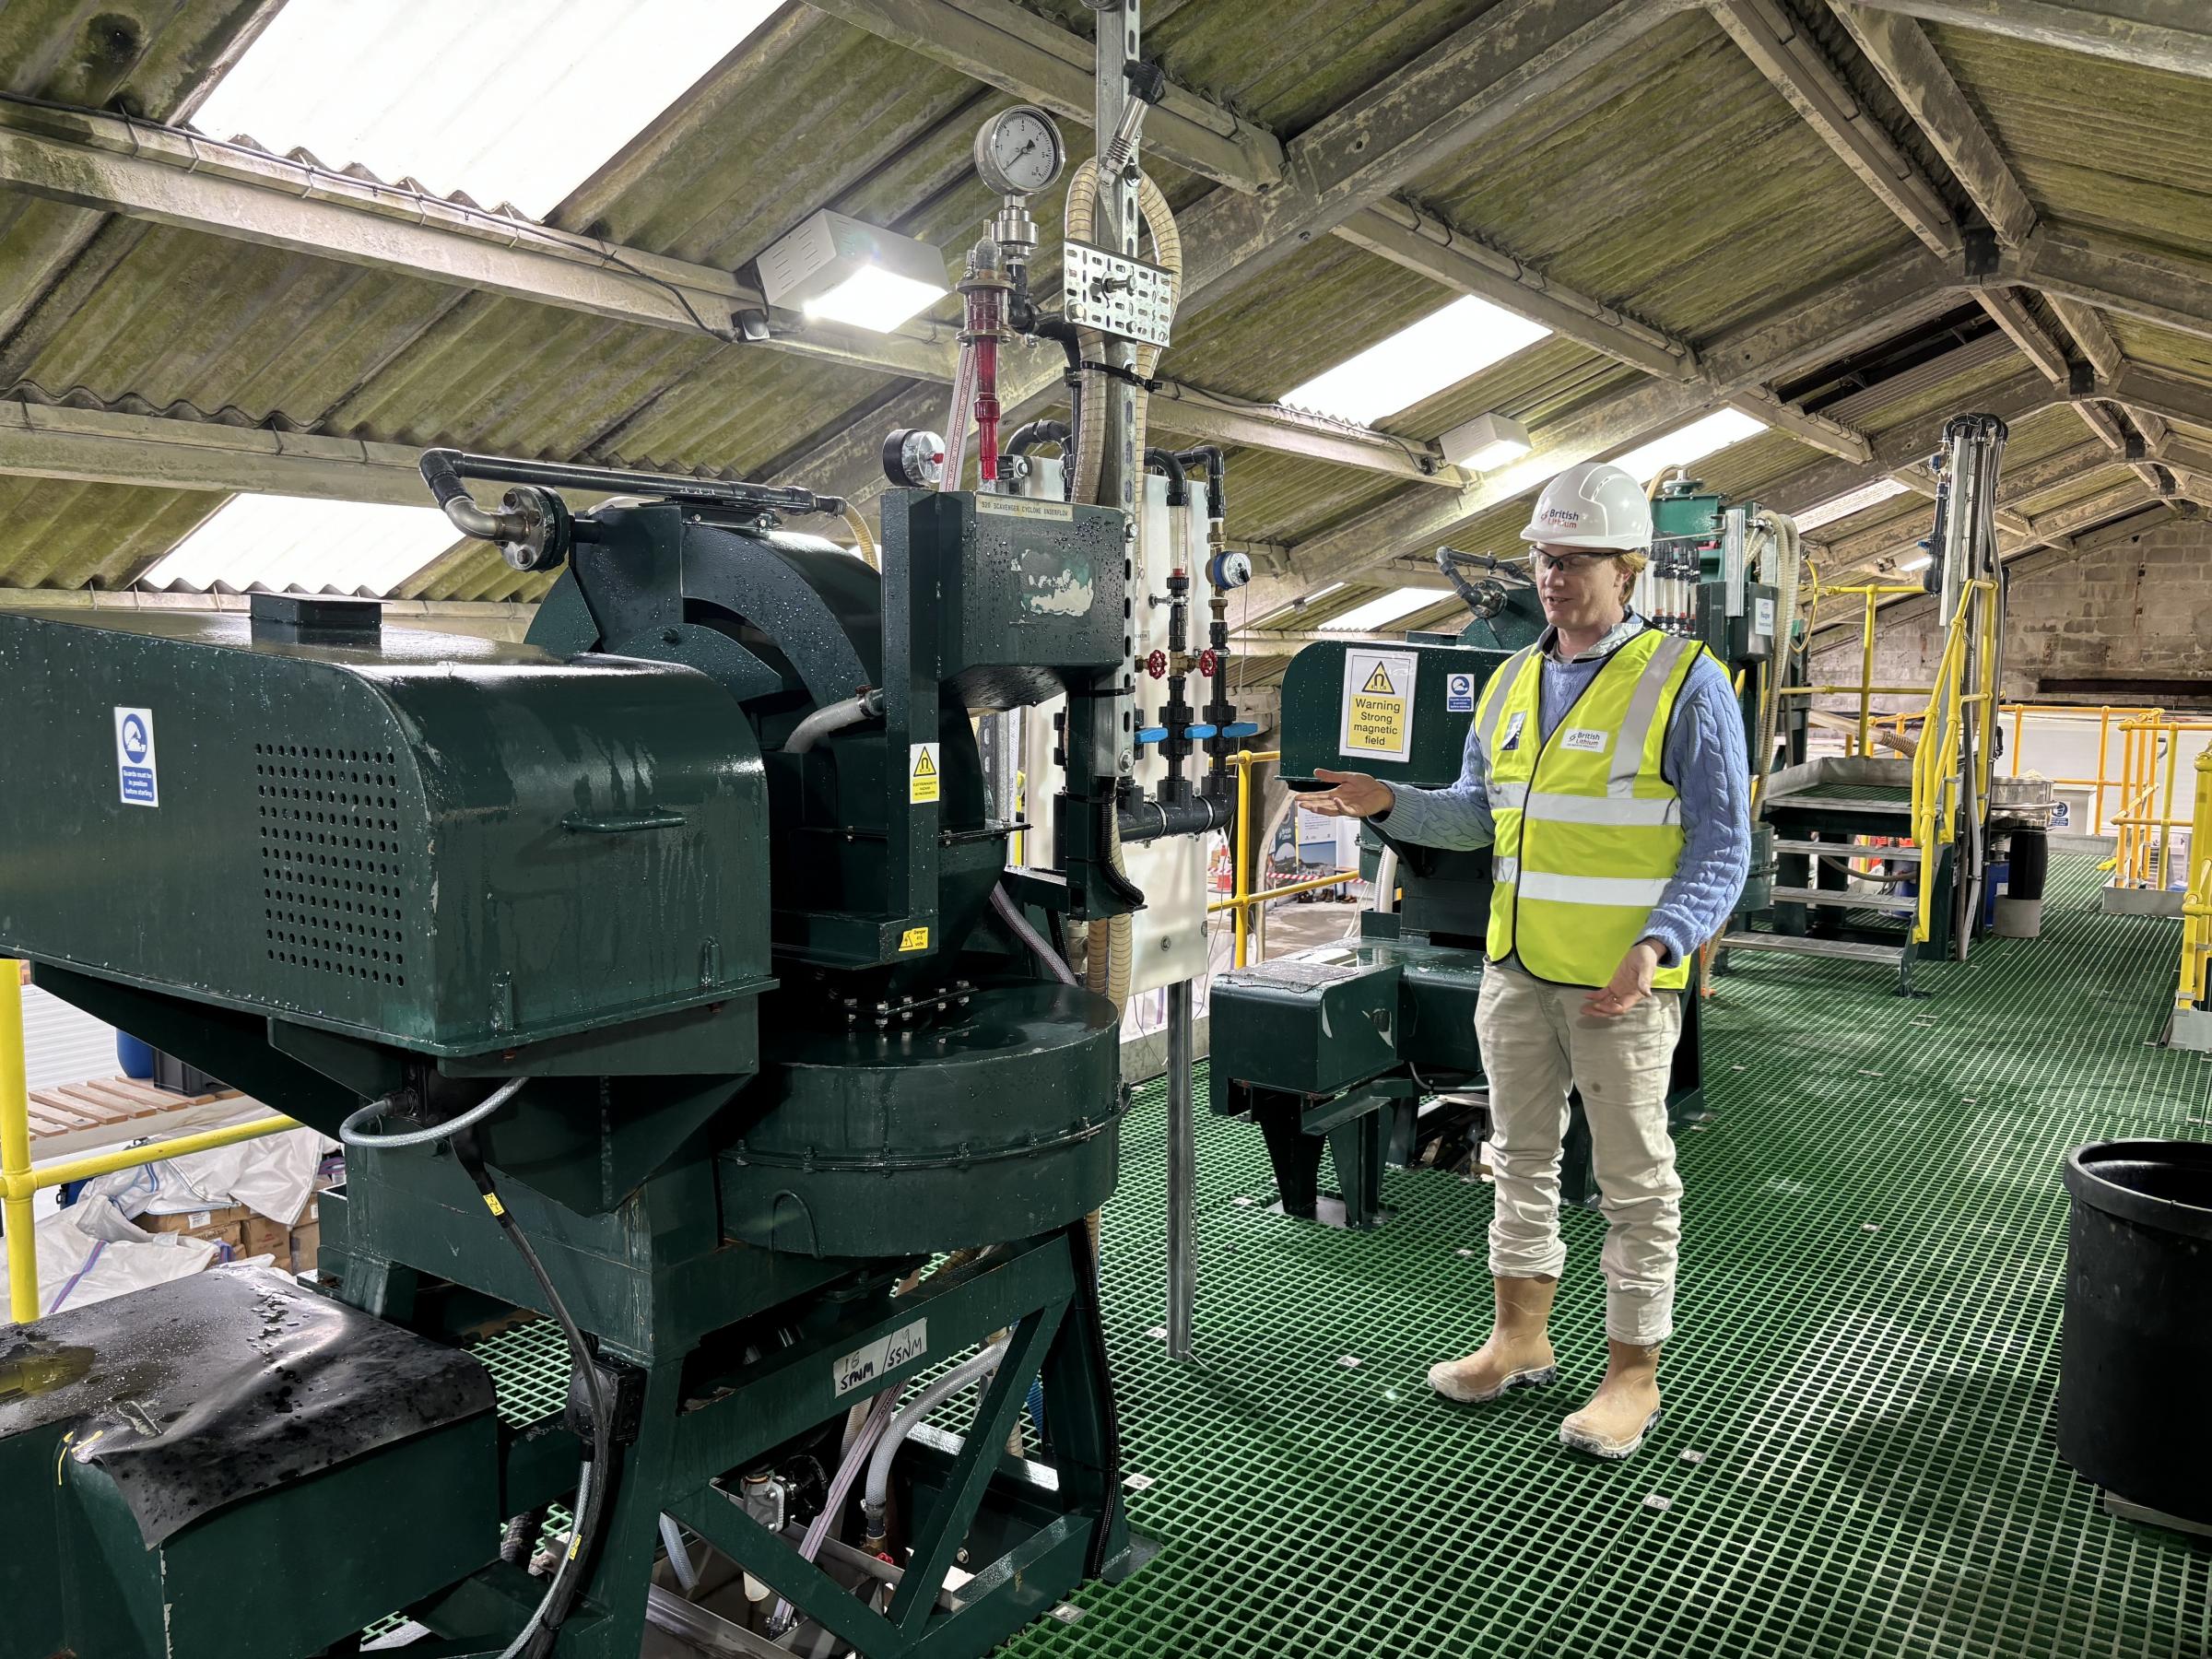 Andrew Smith at Imerys British Lithium\s pilot plant at Roche, near St Austell (Pic: Lee Trewhela/LDRS)